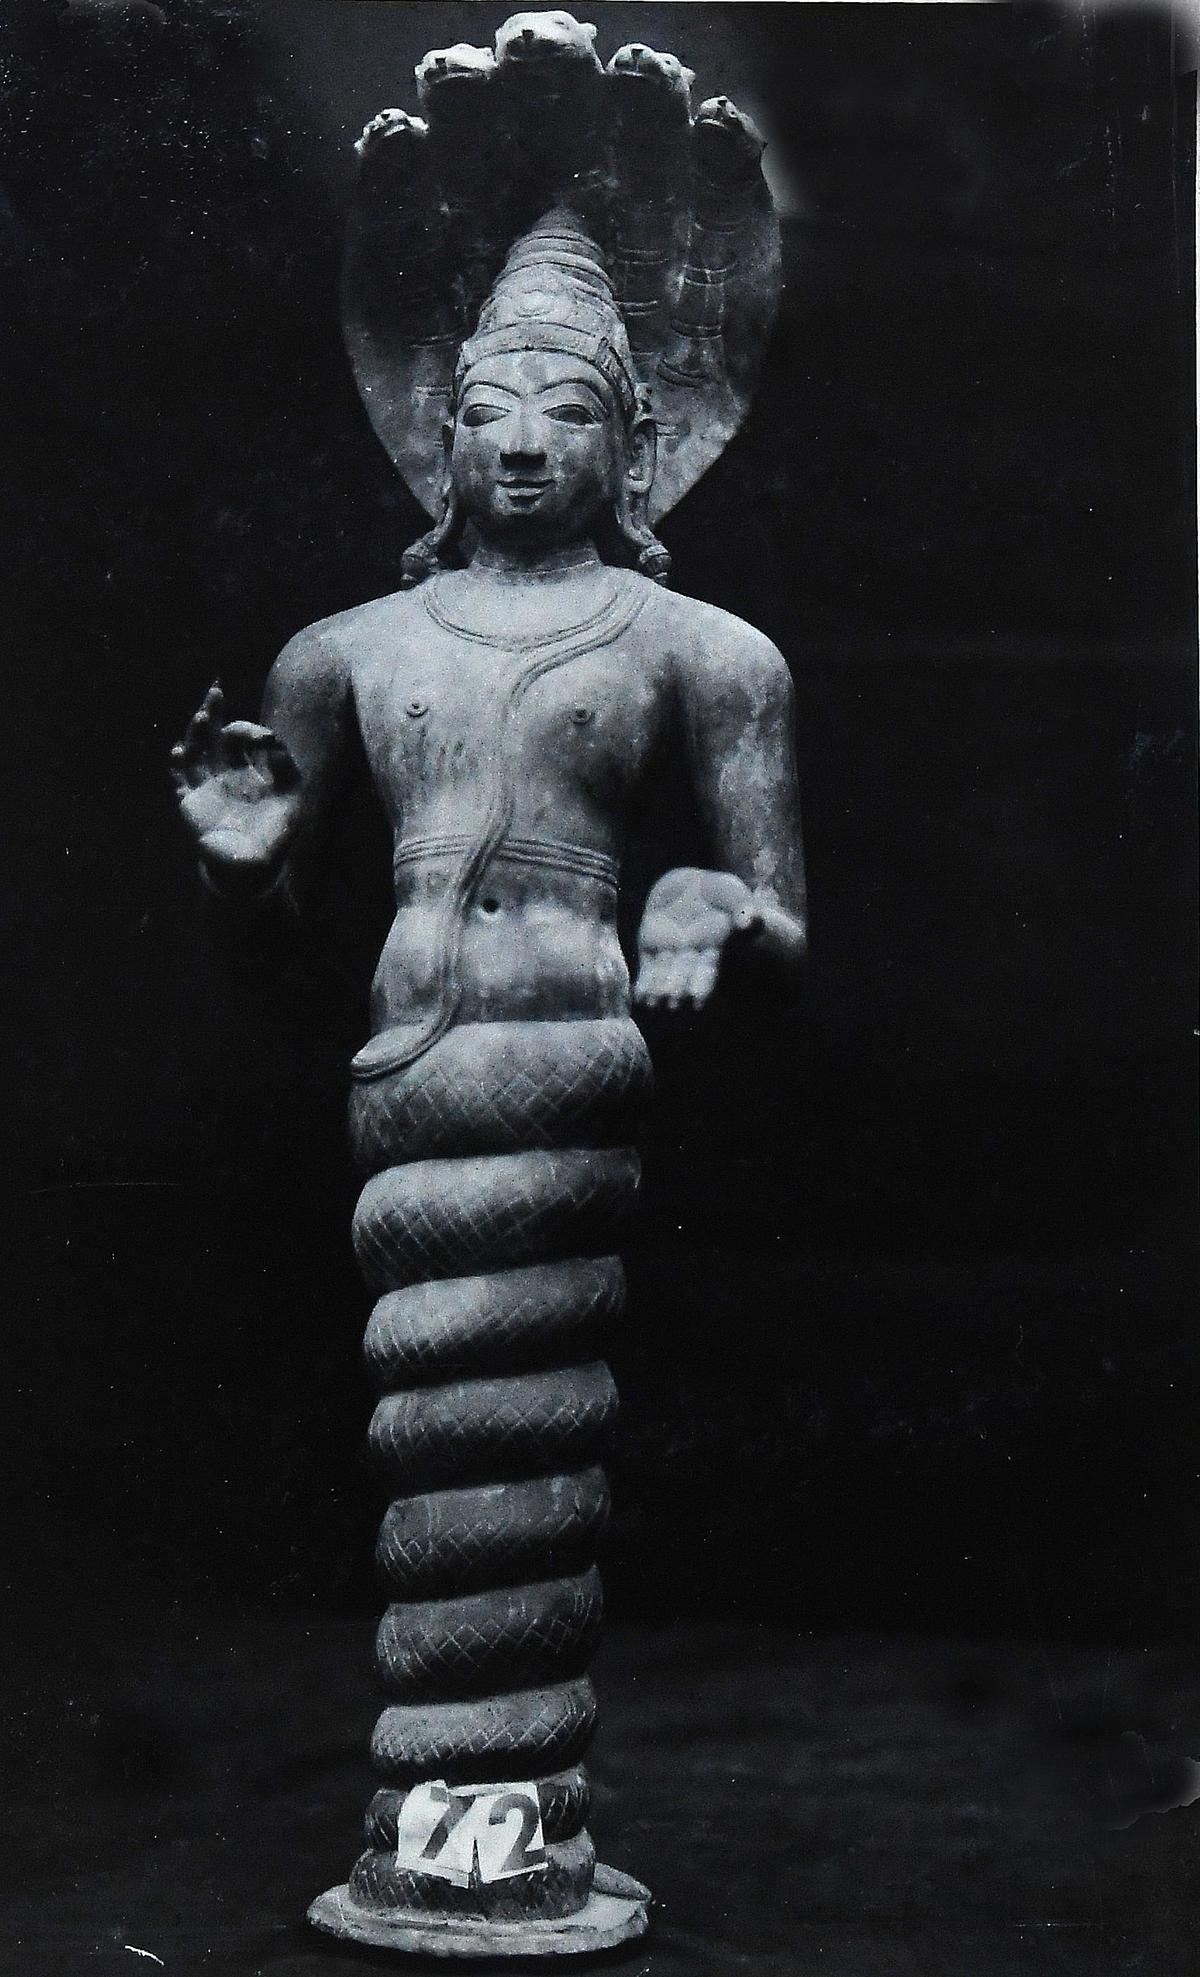 A bronze idol of Patanjali from the 12th century AD found at Chidambaram Thillai Nataraja temple in 1976.